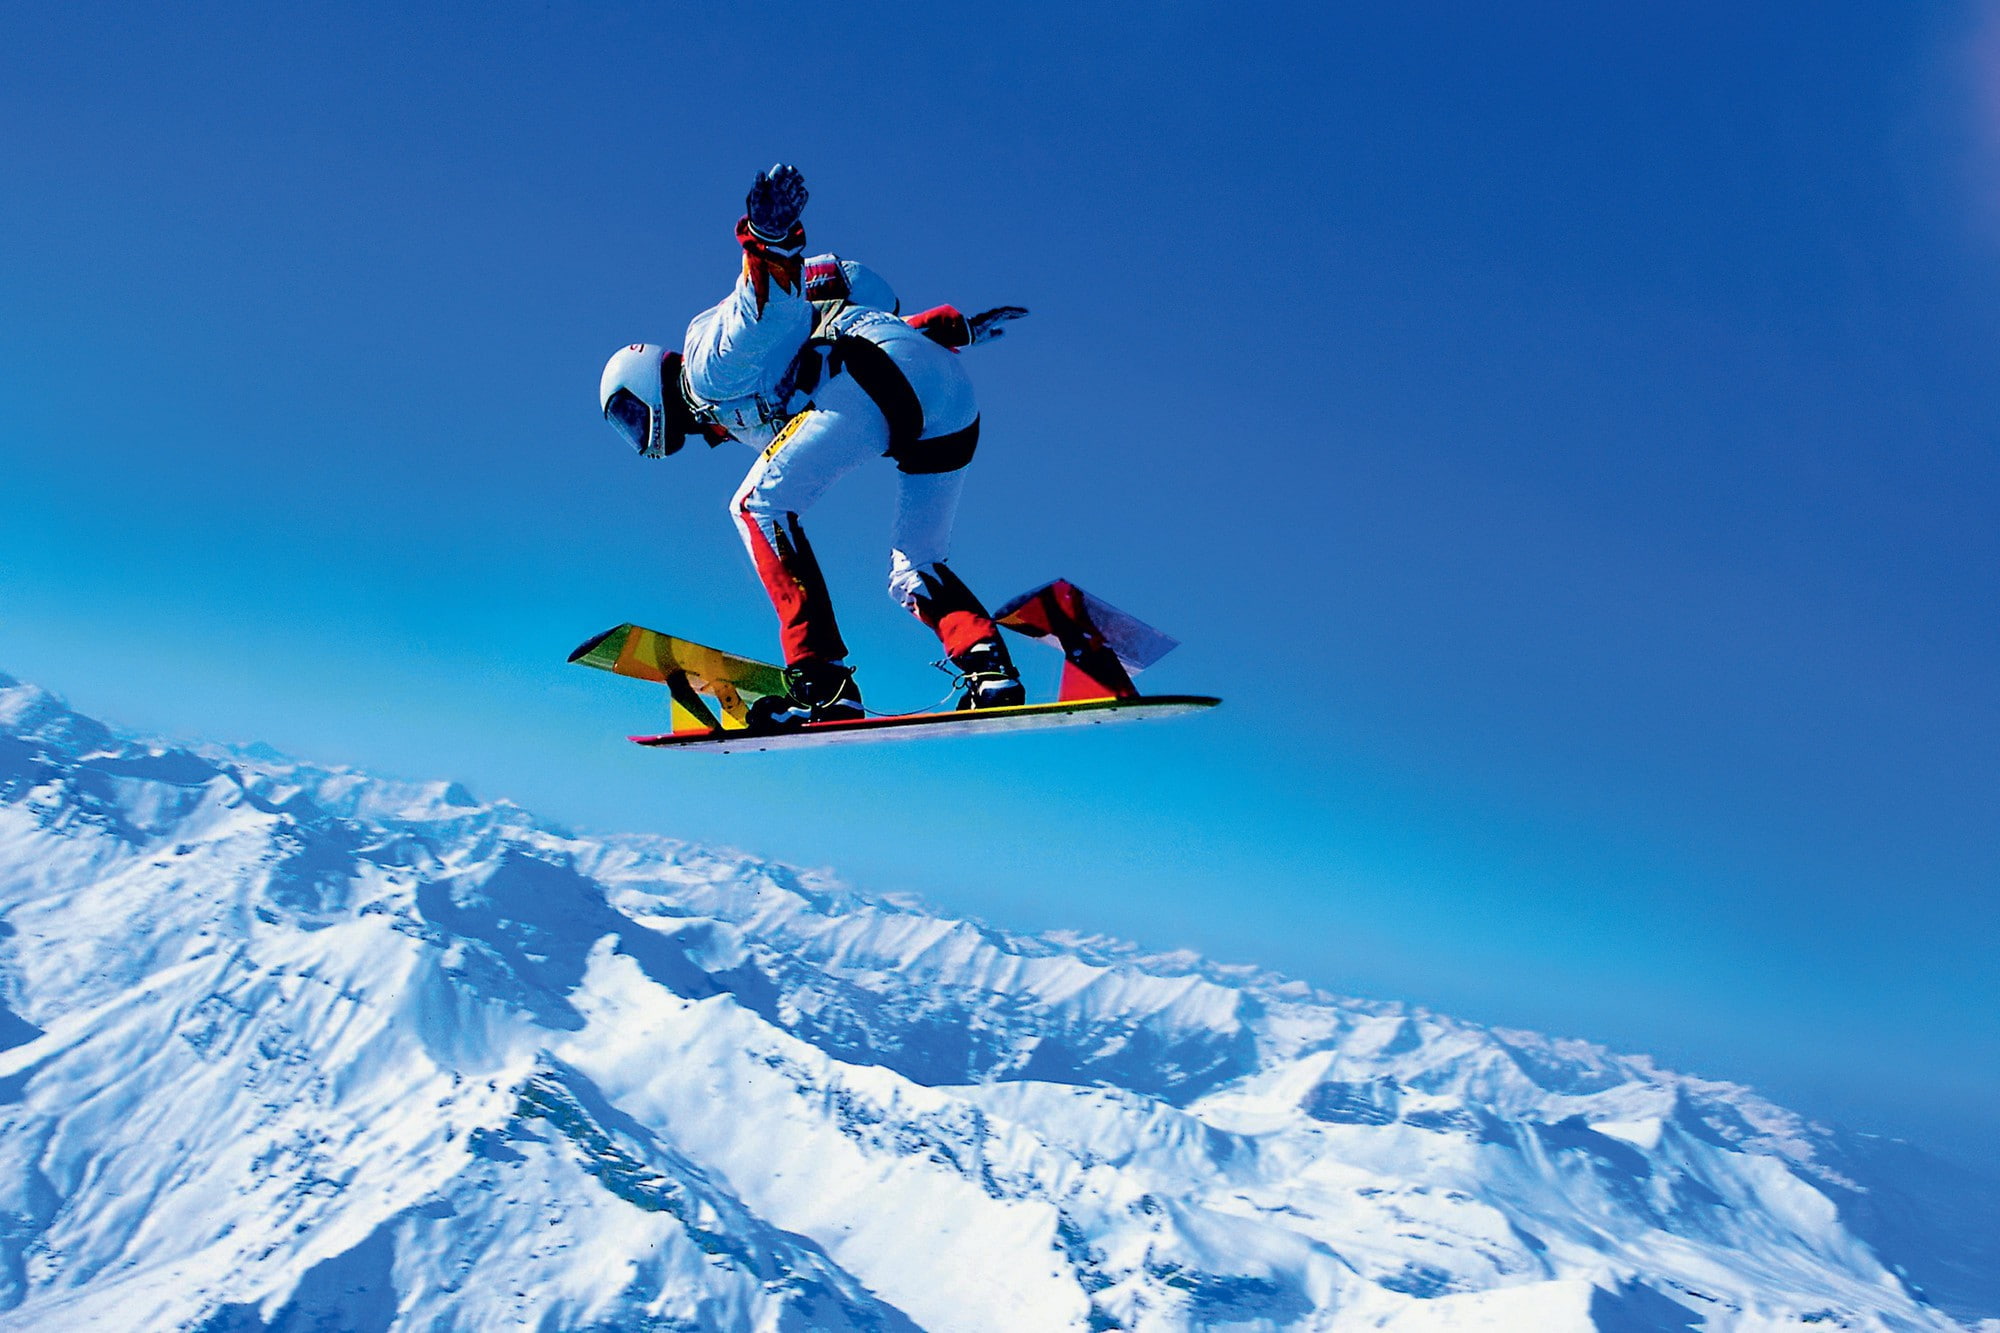 Parachutists, man in white and black suit and white helmet riding on snowboard